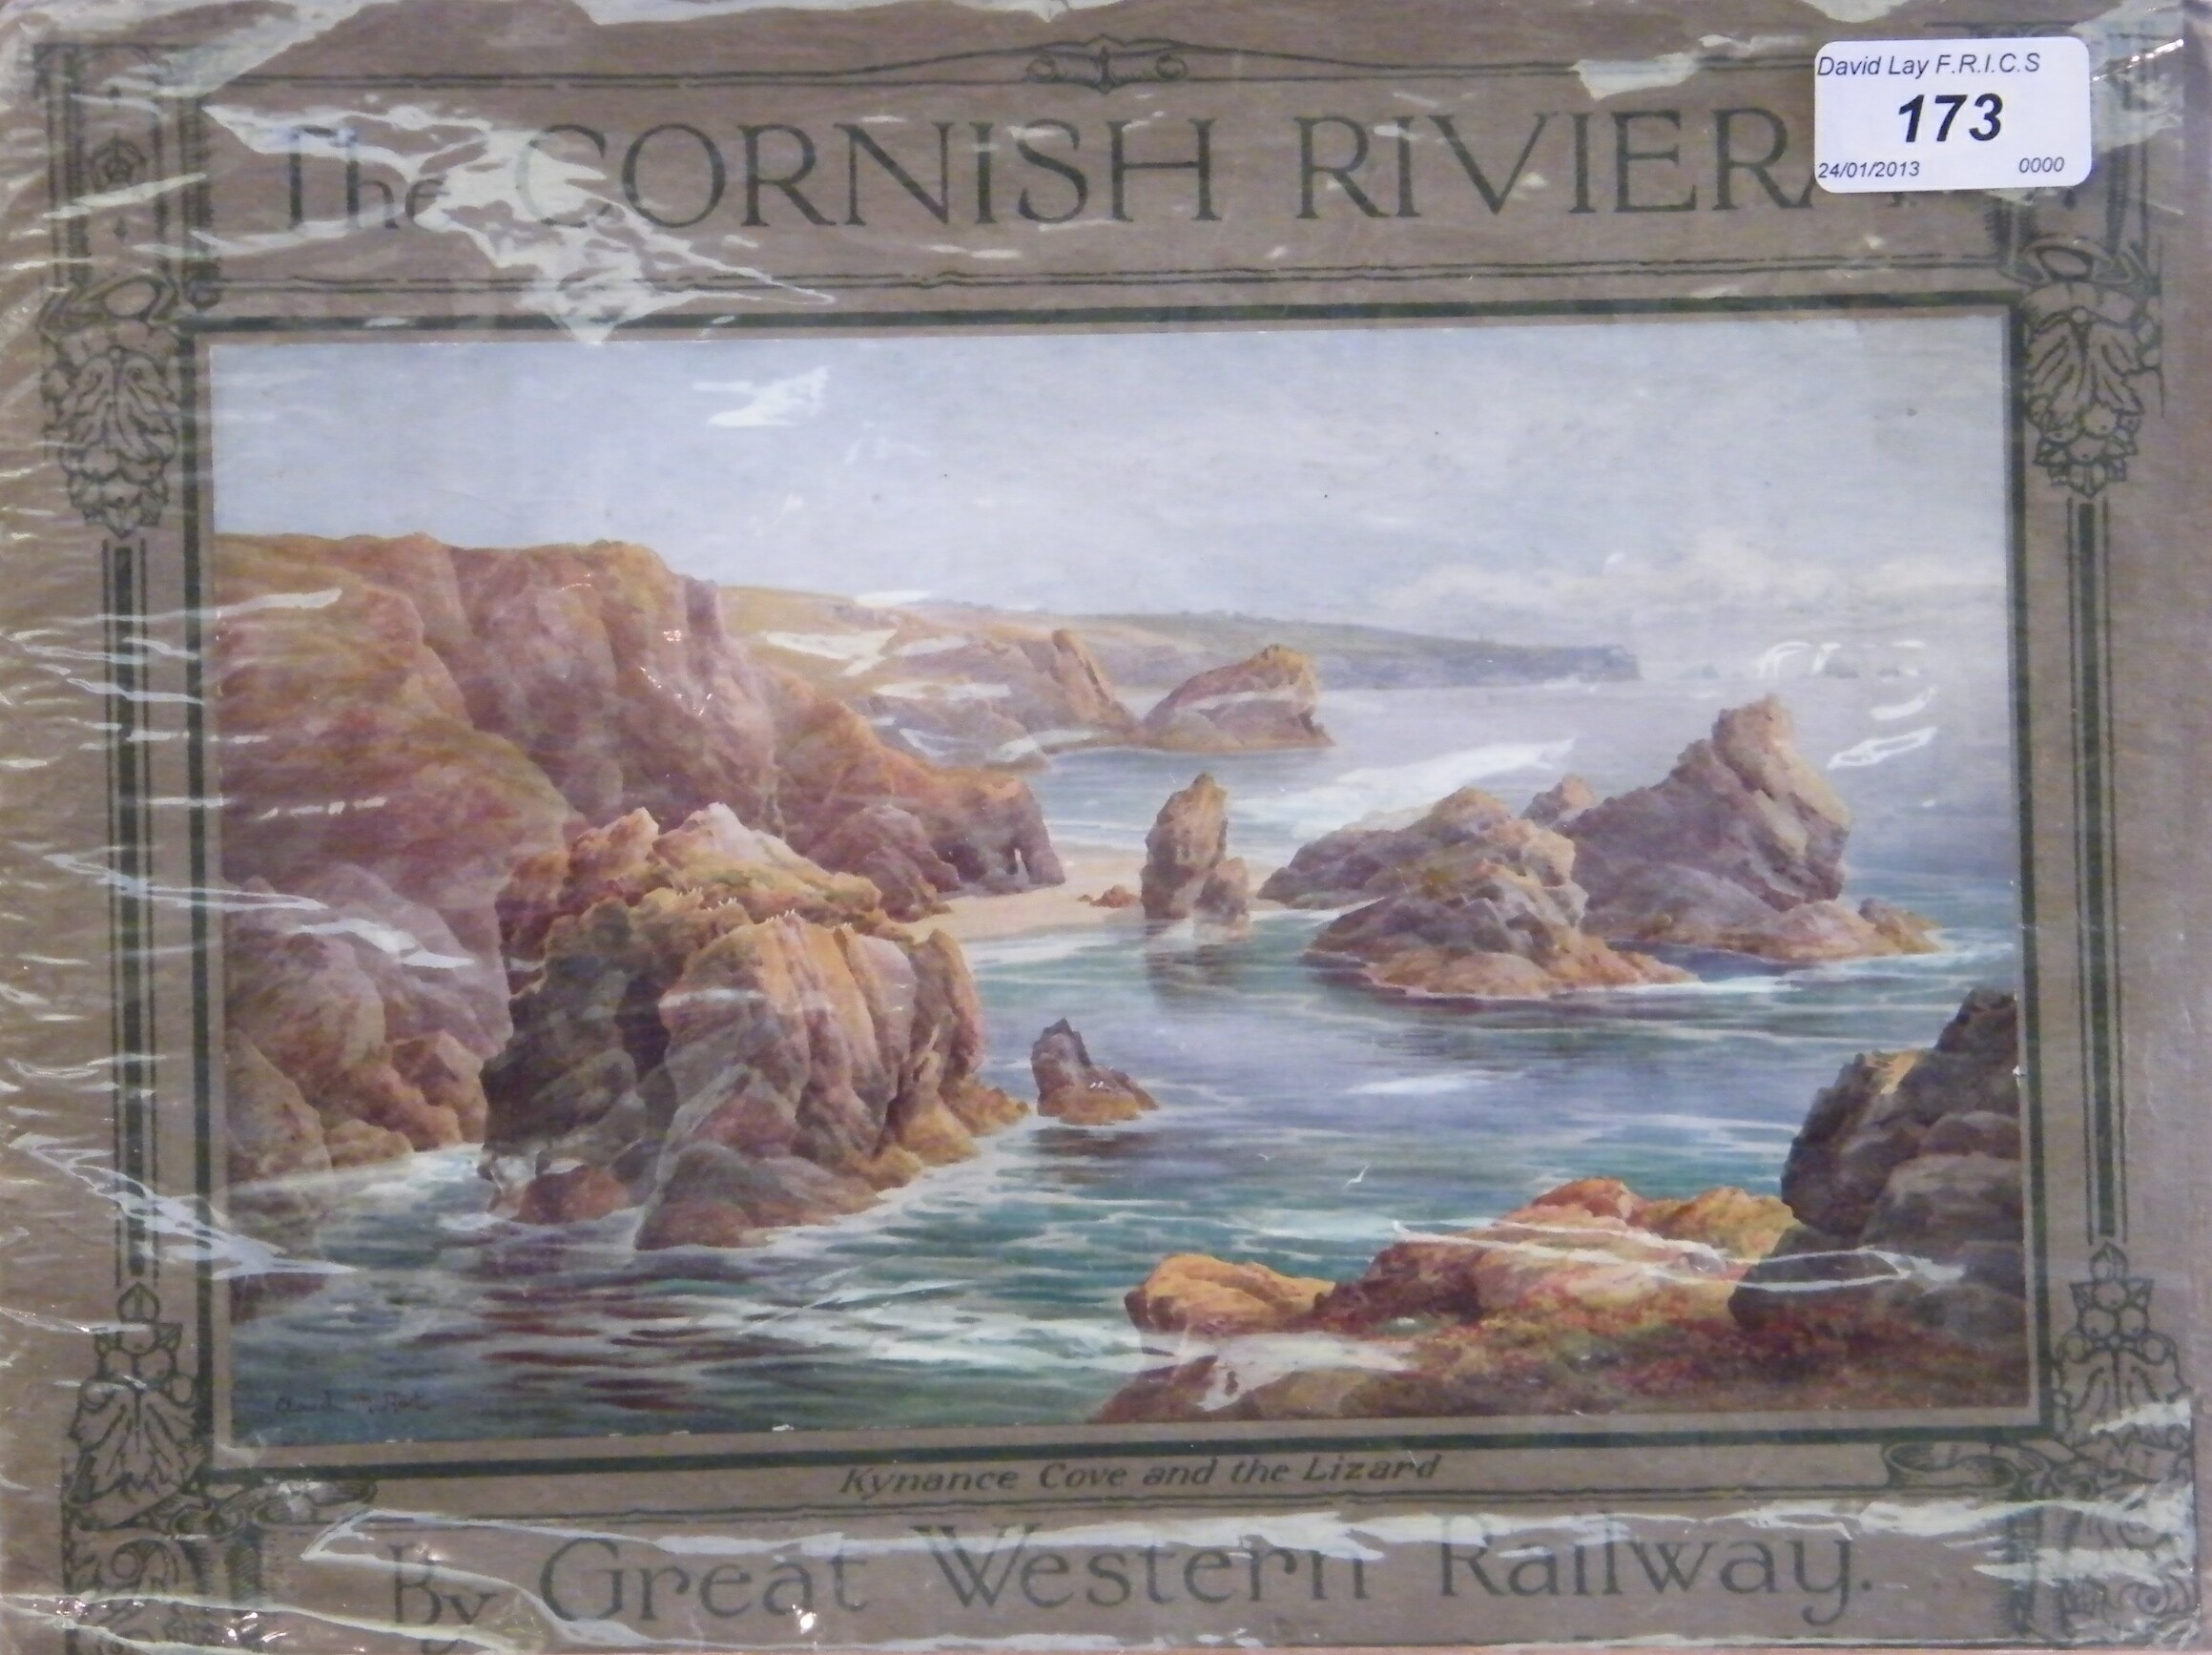 A booklet "The Cornish Riviera 
by Great Western Railway" with
tipped in illustrations by 
Claude